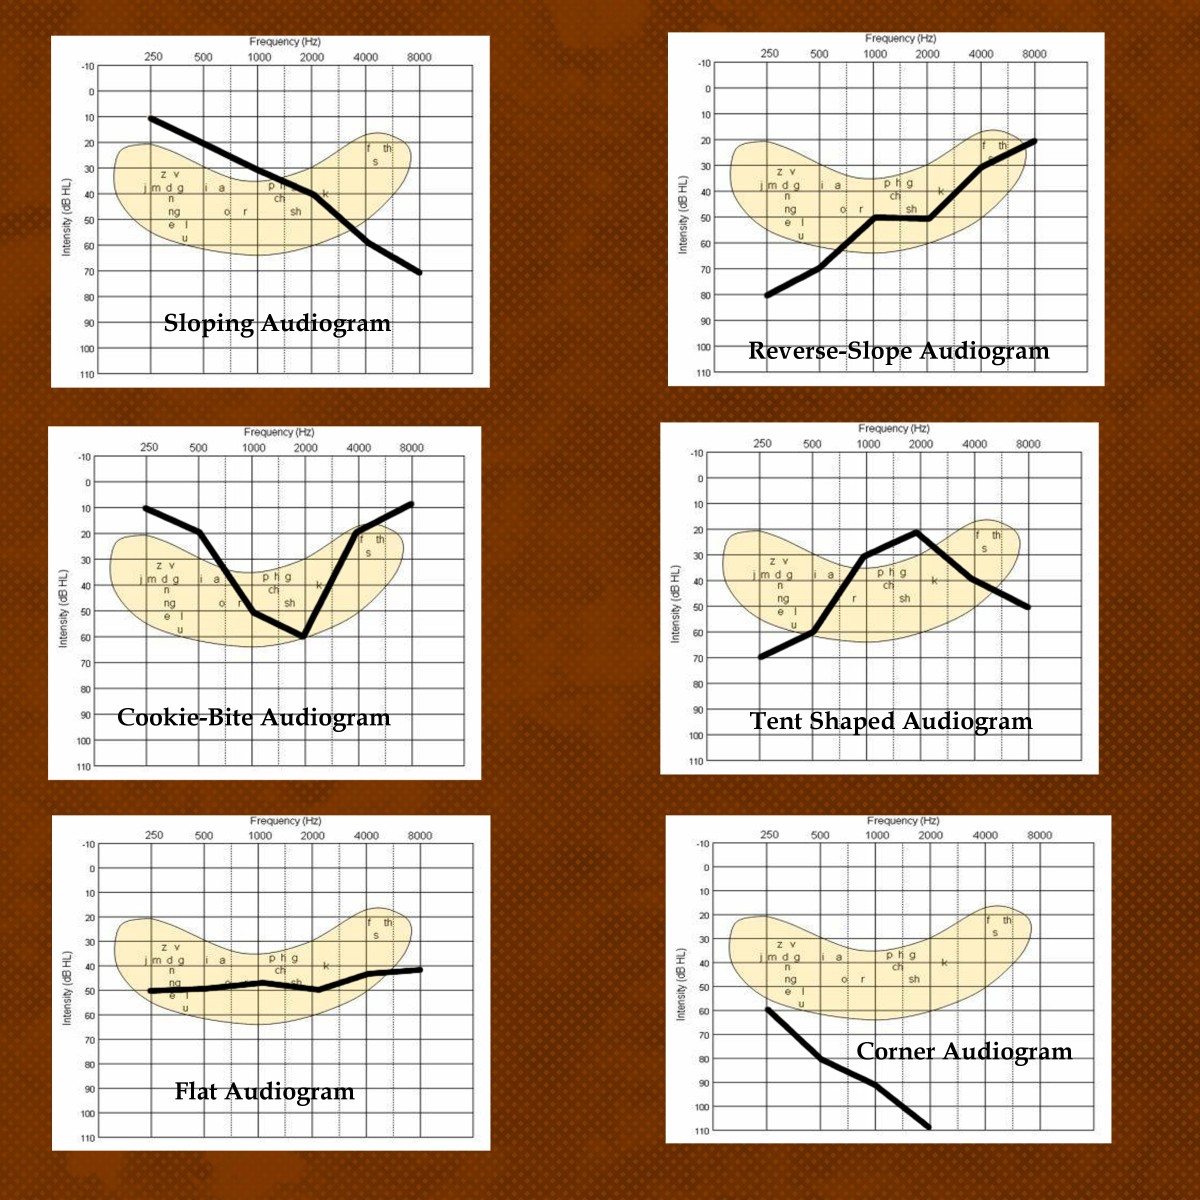 The various types of audiograms